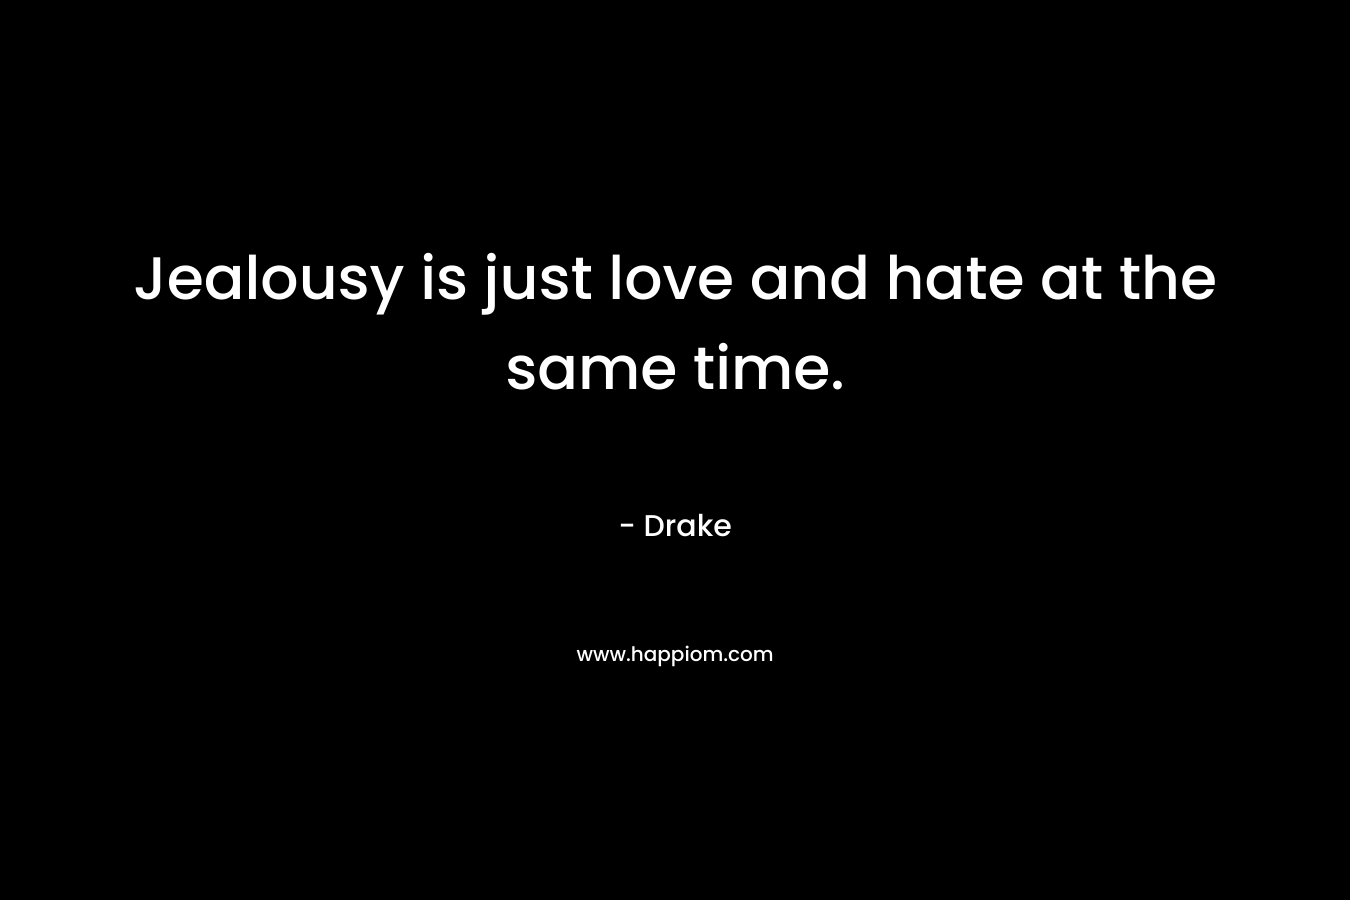 Jealousy is just love and hate at the same time. – Drake